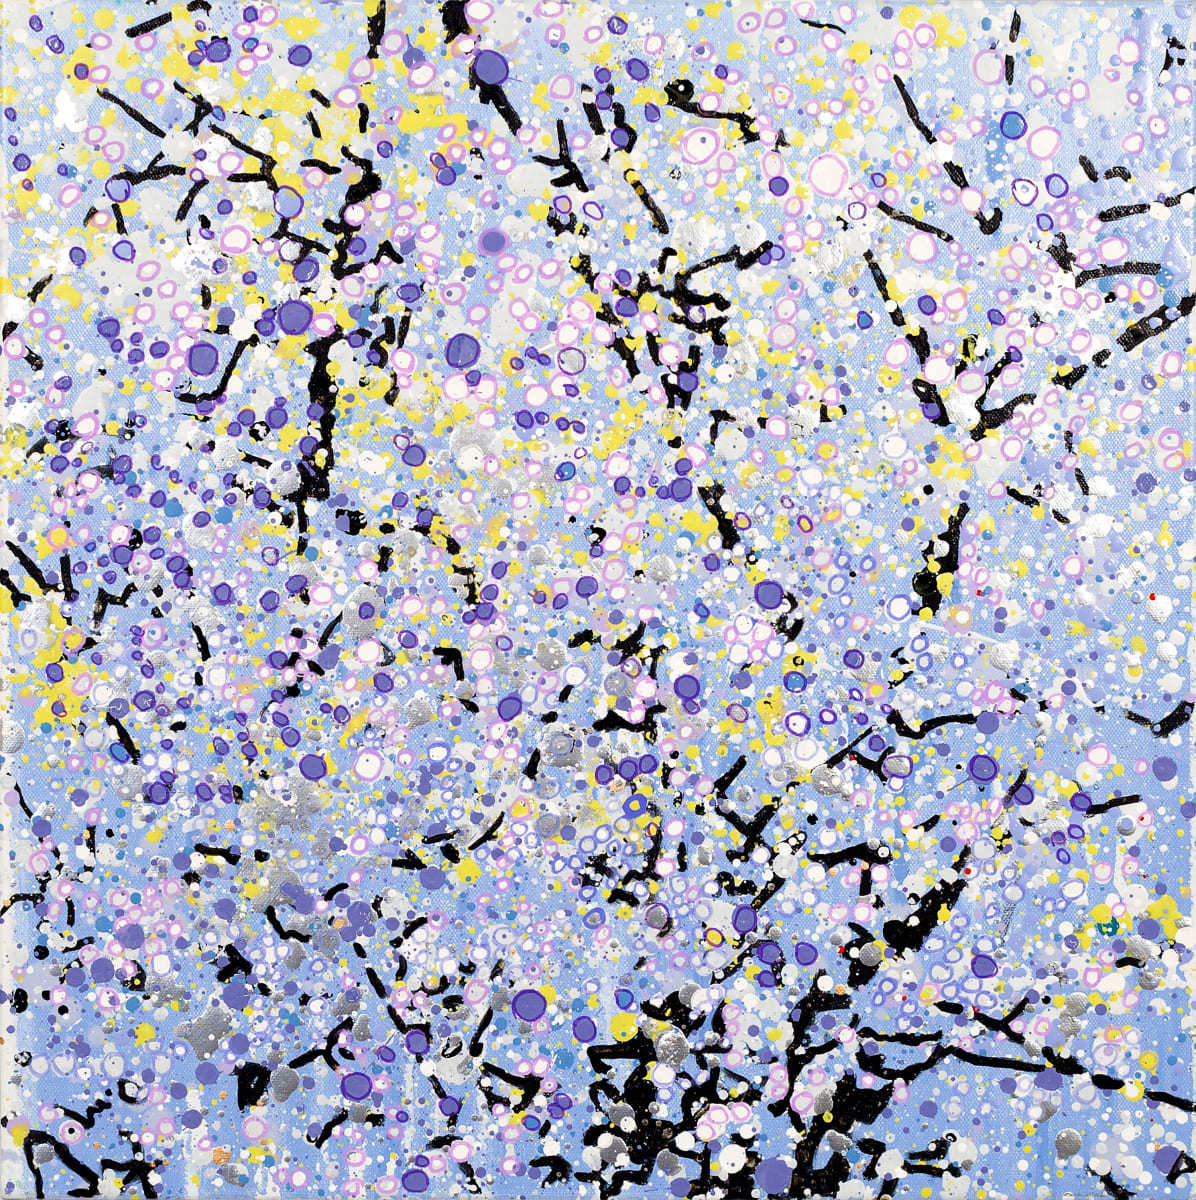 Almond Tree - Valbonne by Leslie Parke  Image: "Almond Tree - Valbonne", 18 inches x 18 inches, oil, metallic paint, and acrylic markers on canvas, © 2022 Leslie Parke